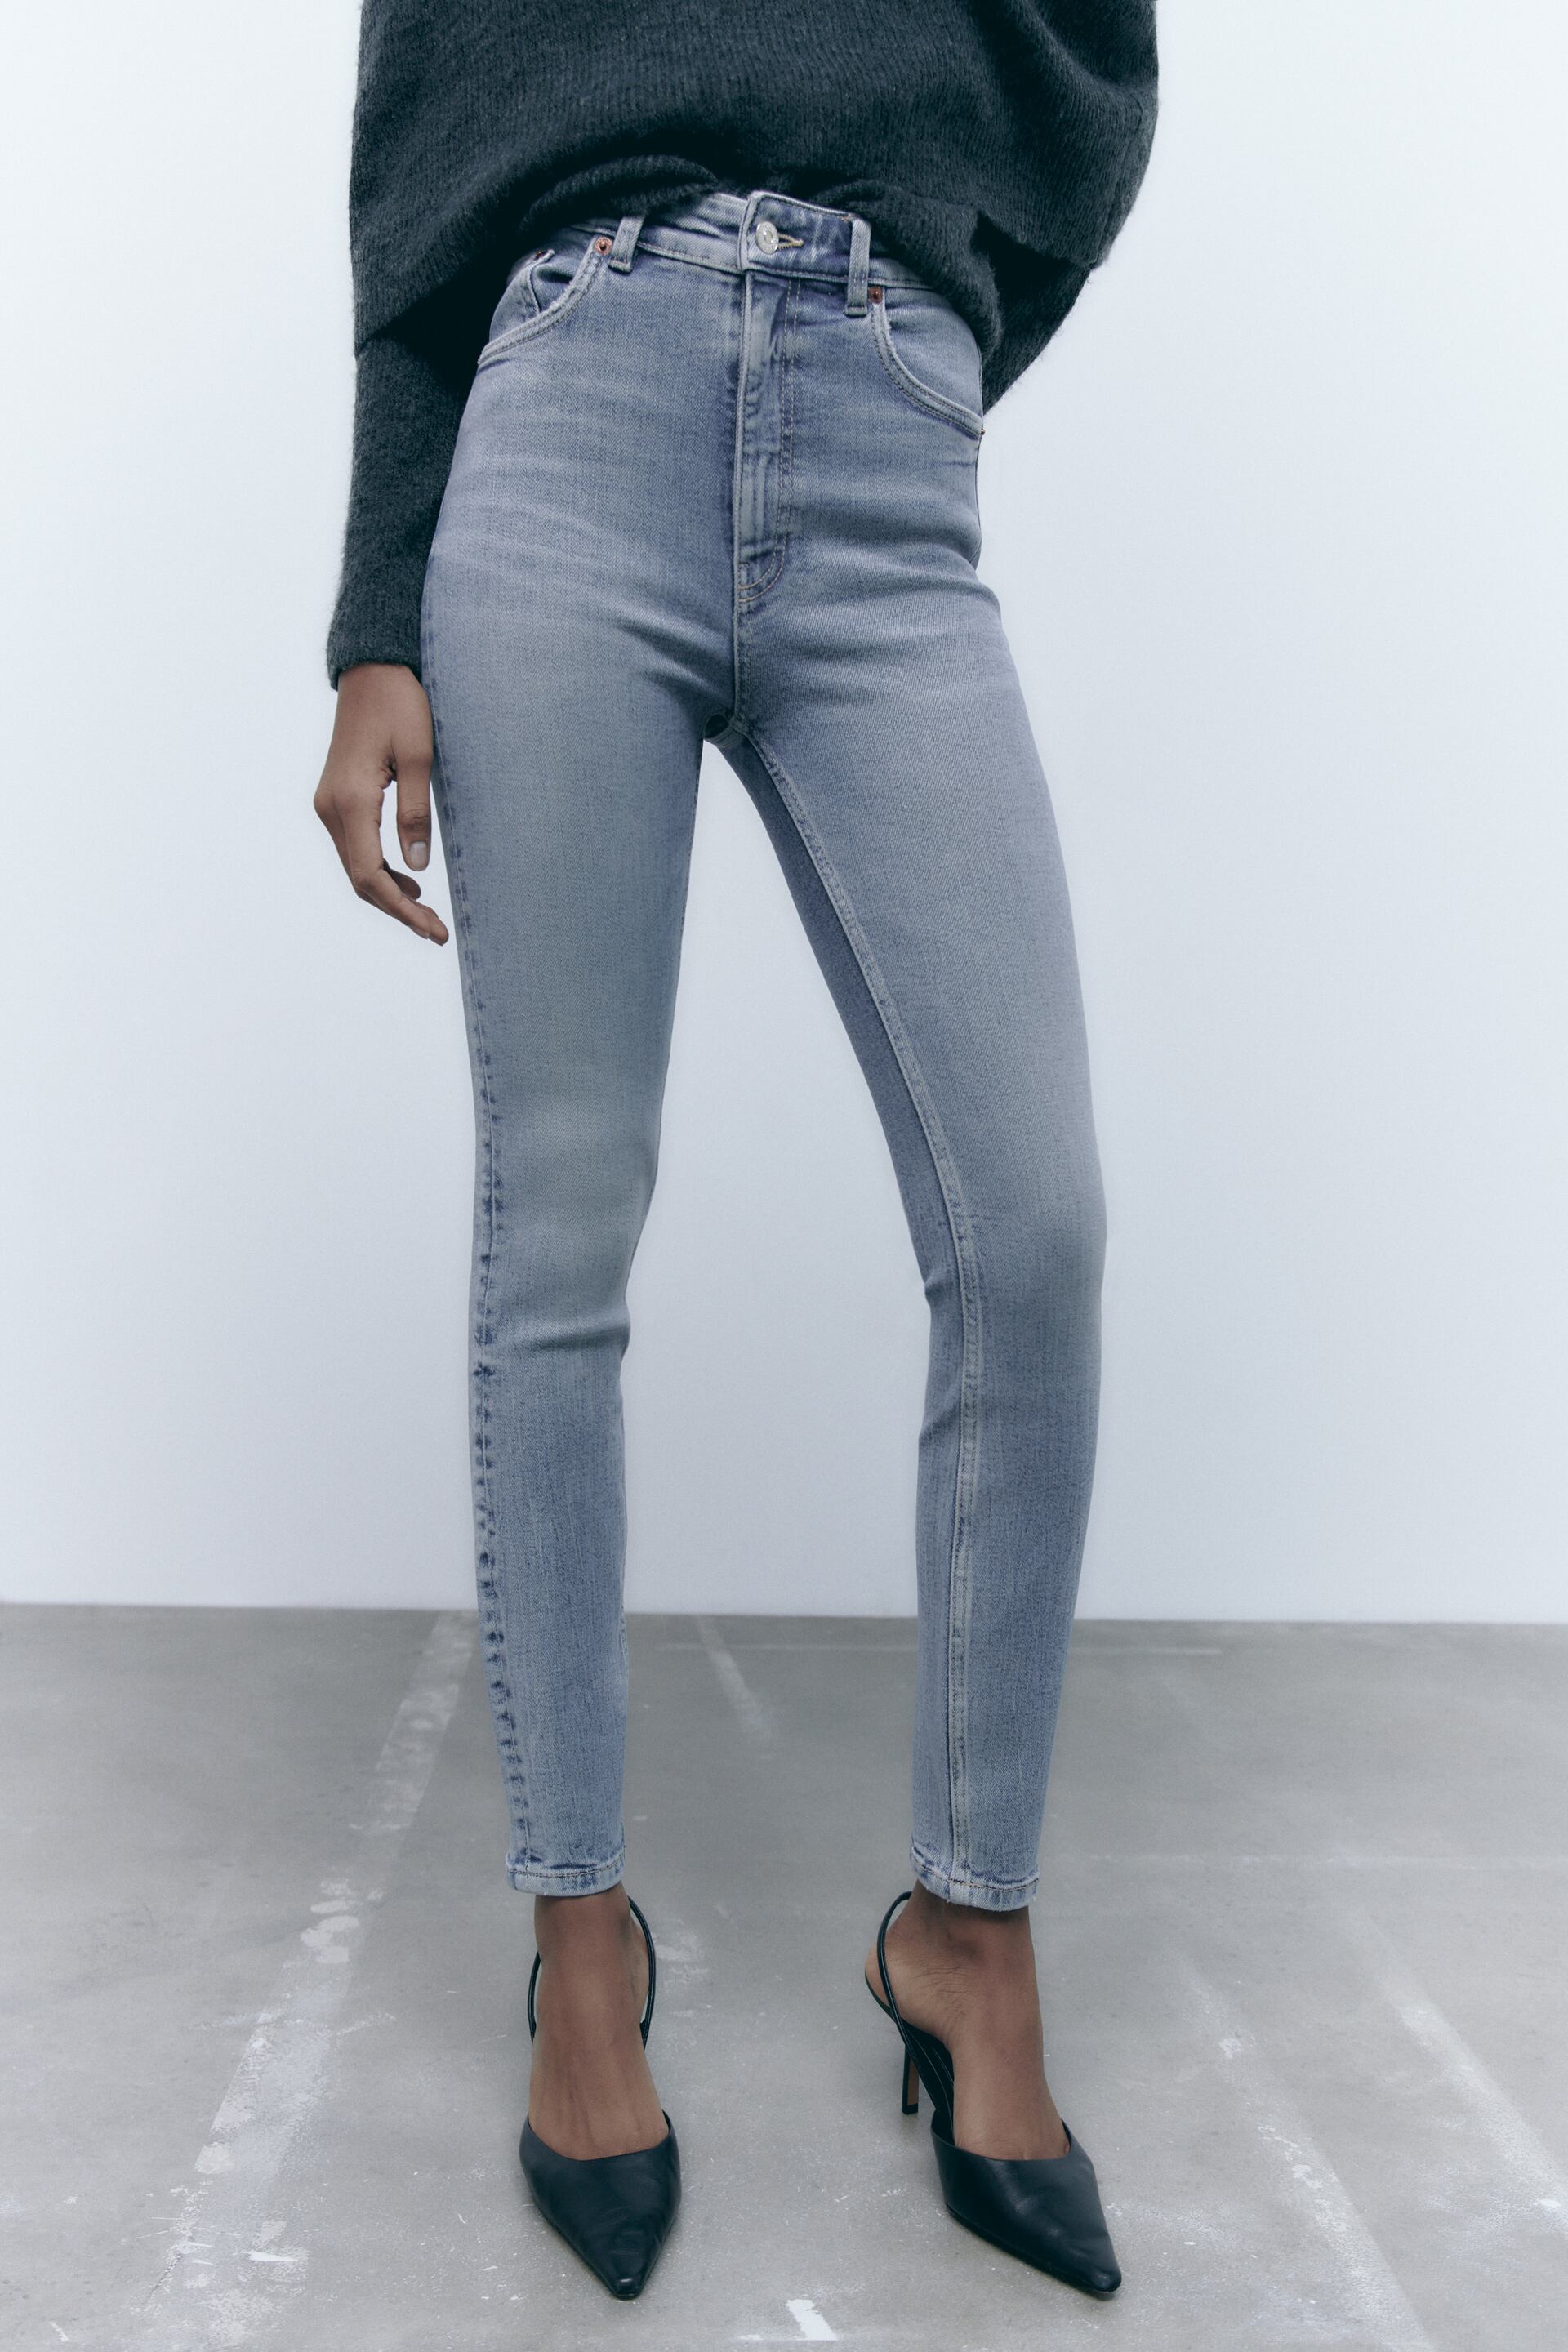 we Appeal to be attractive Min TRF VINTAGE SKINNY JEANS - Black | ZARA United States